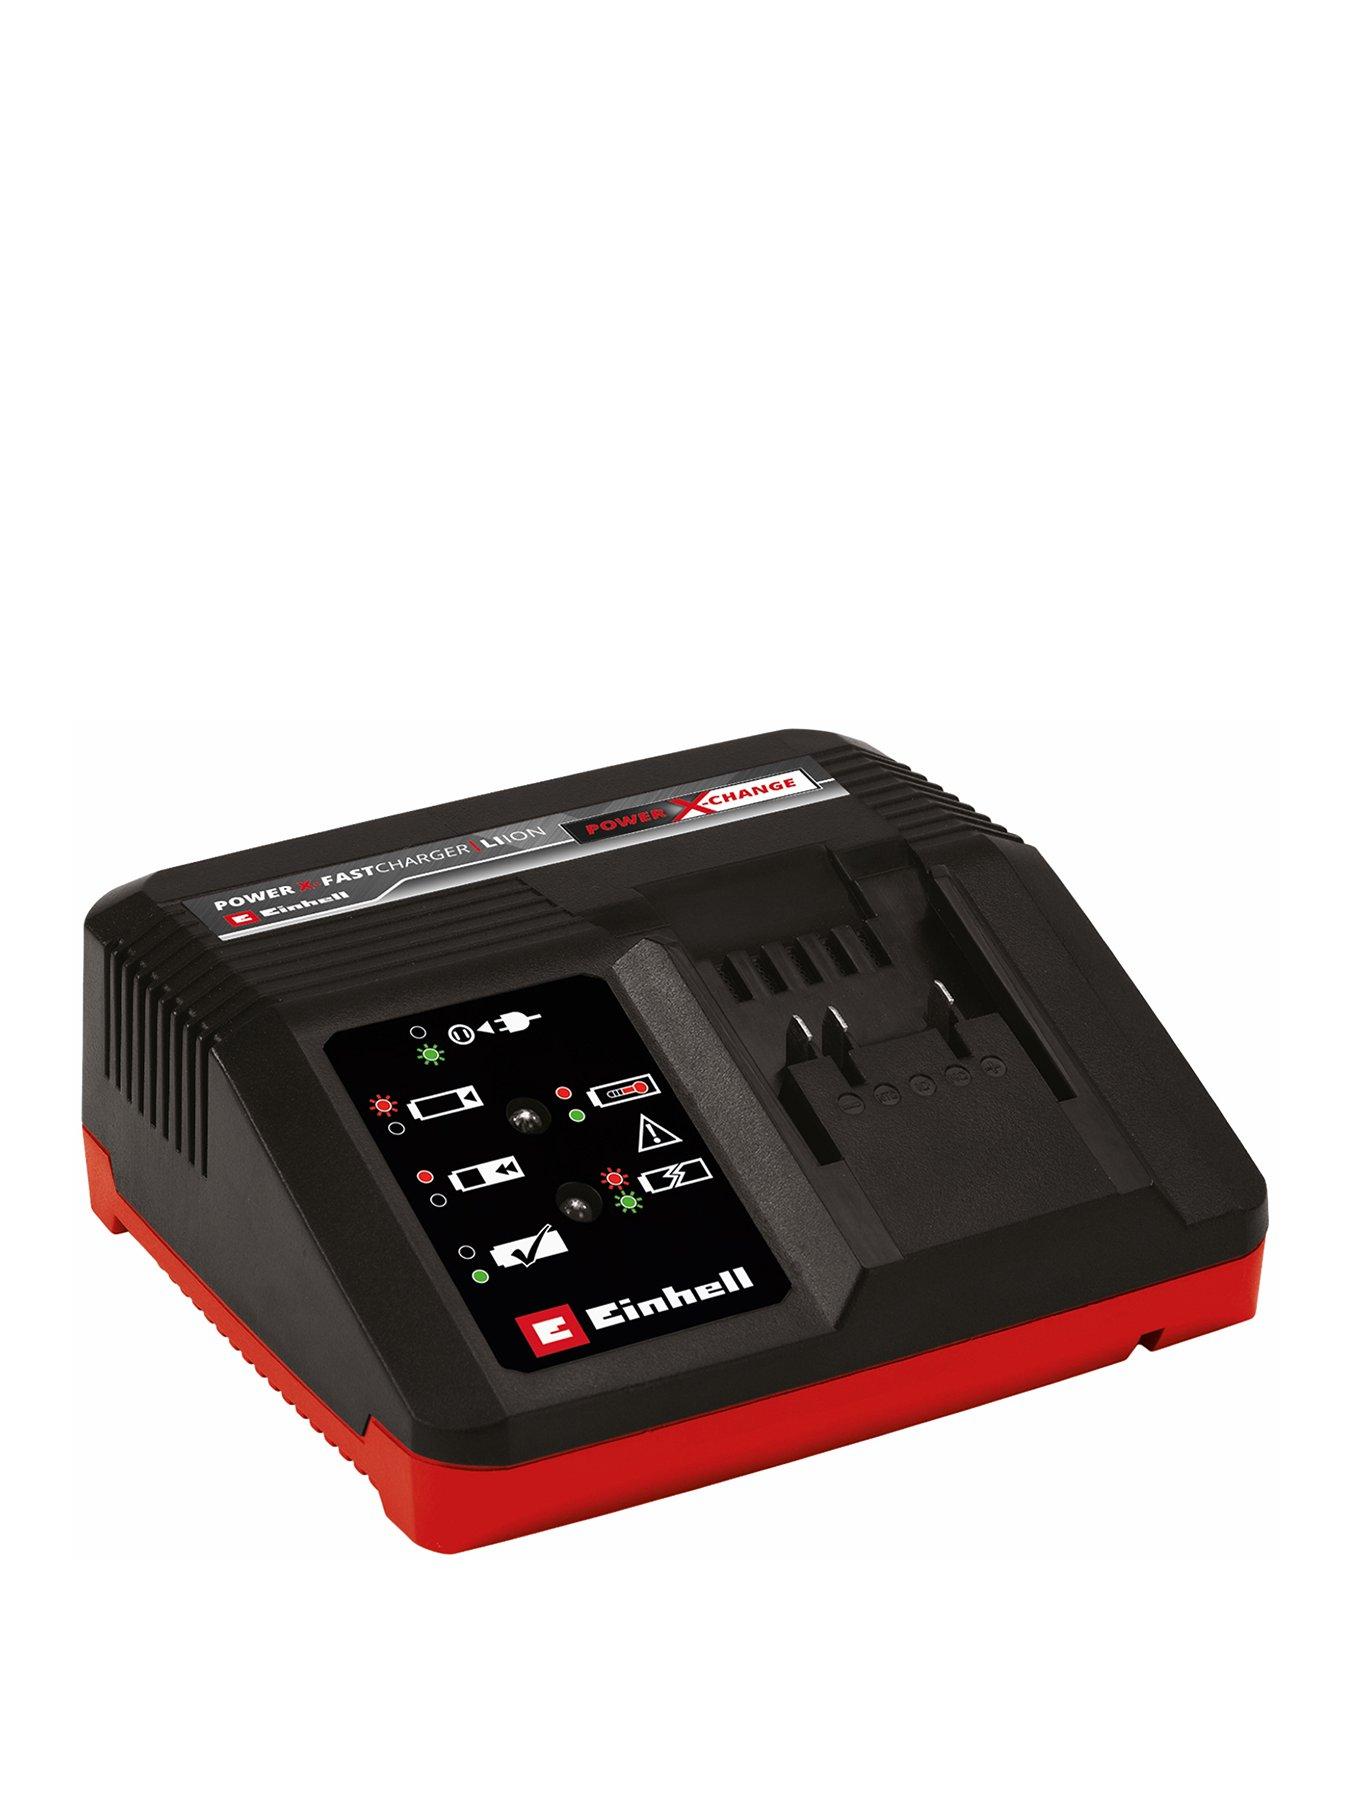 Einhell Power X-Change X-Fast Battery Charger 4A - Battery